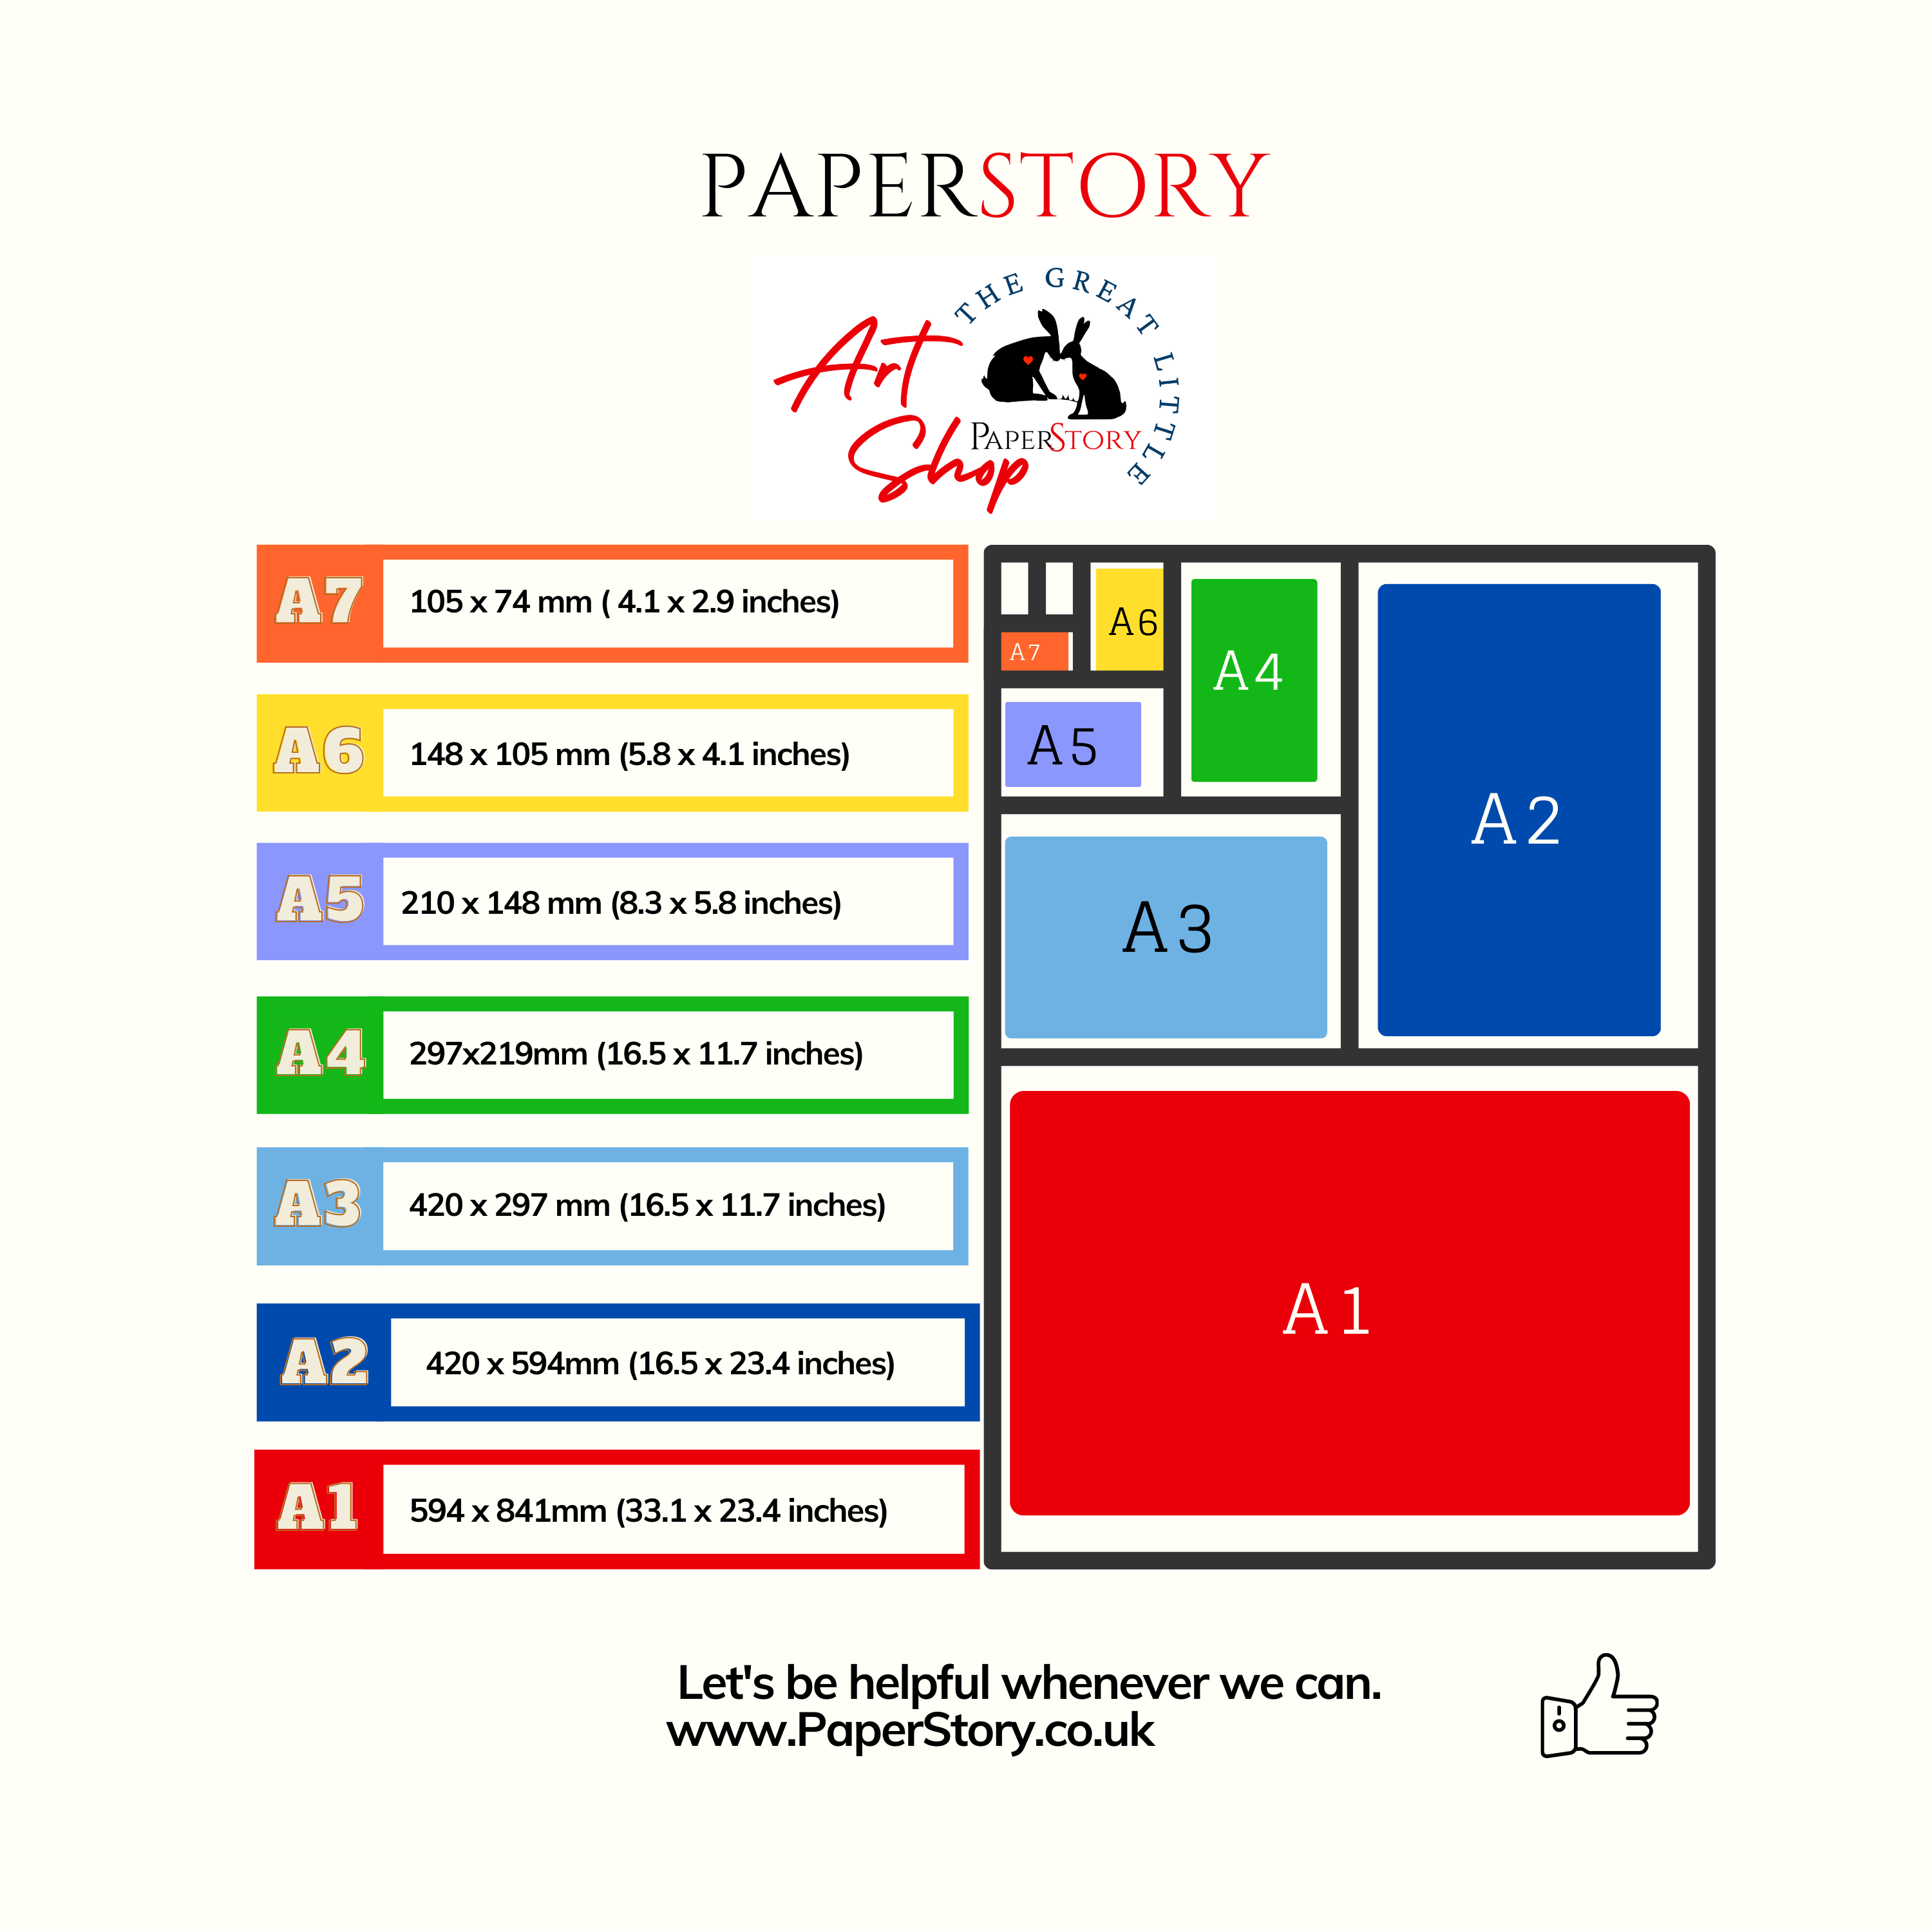 Guide to UK Paper A Sizes. A1, A2, A3, A4, A5, A6,A7